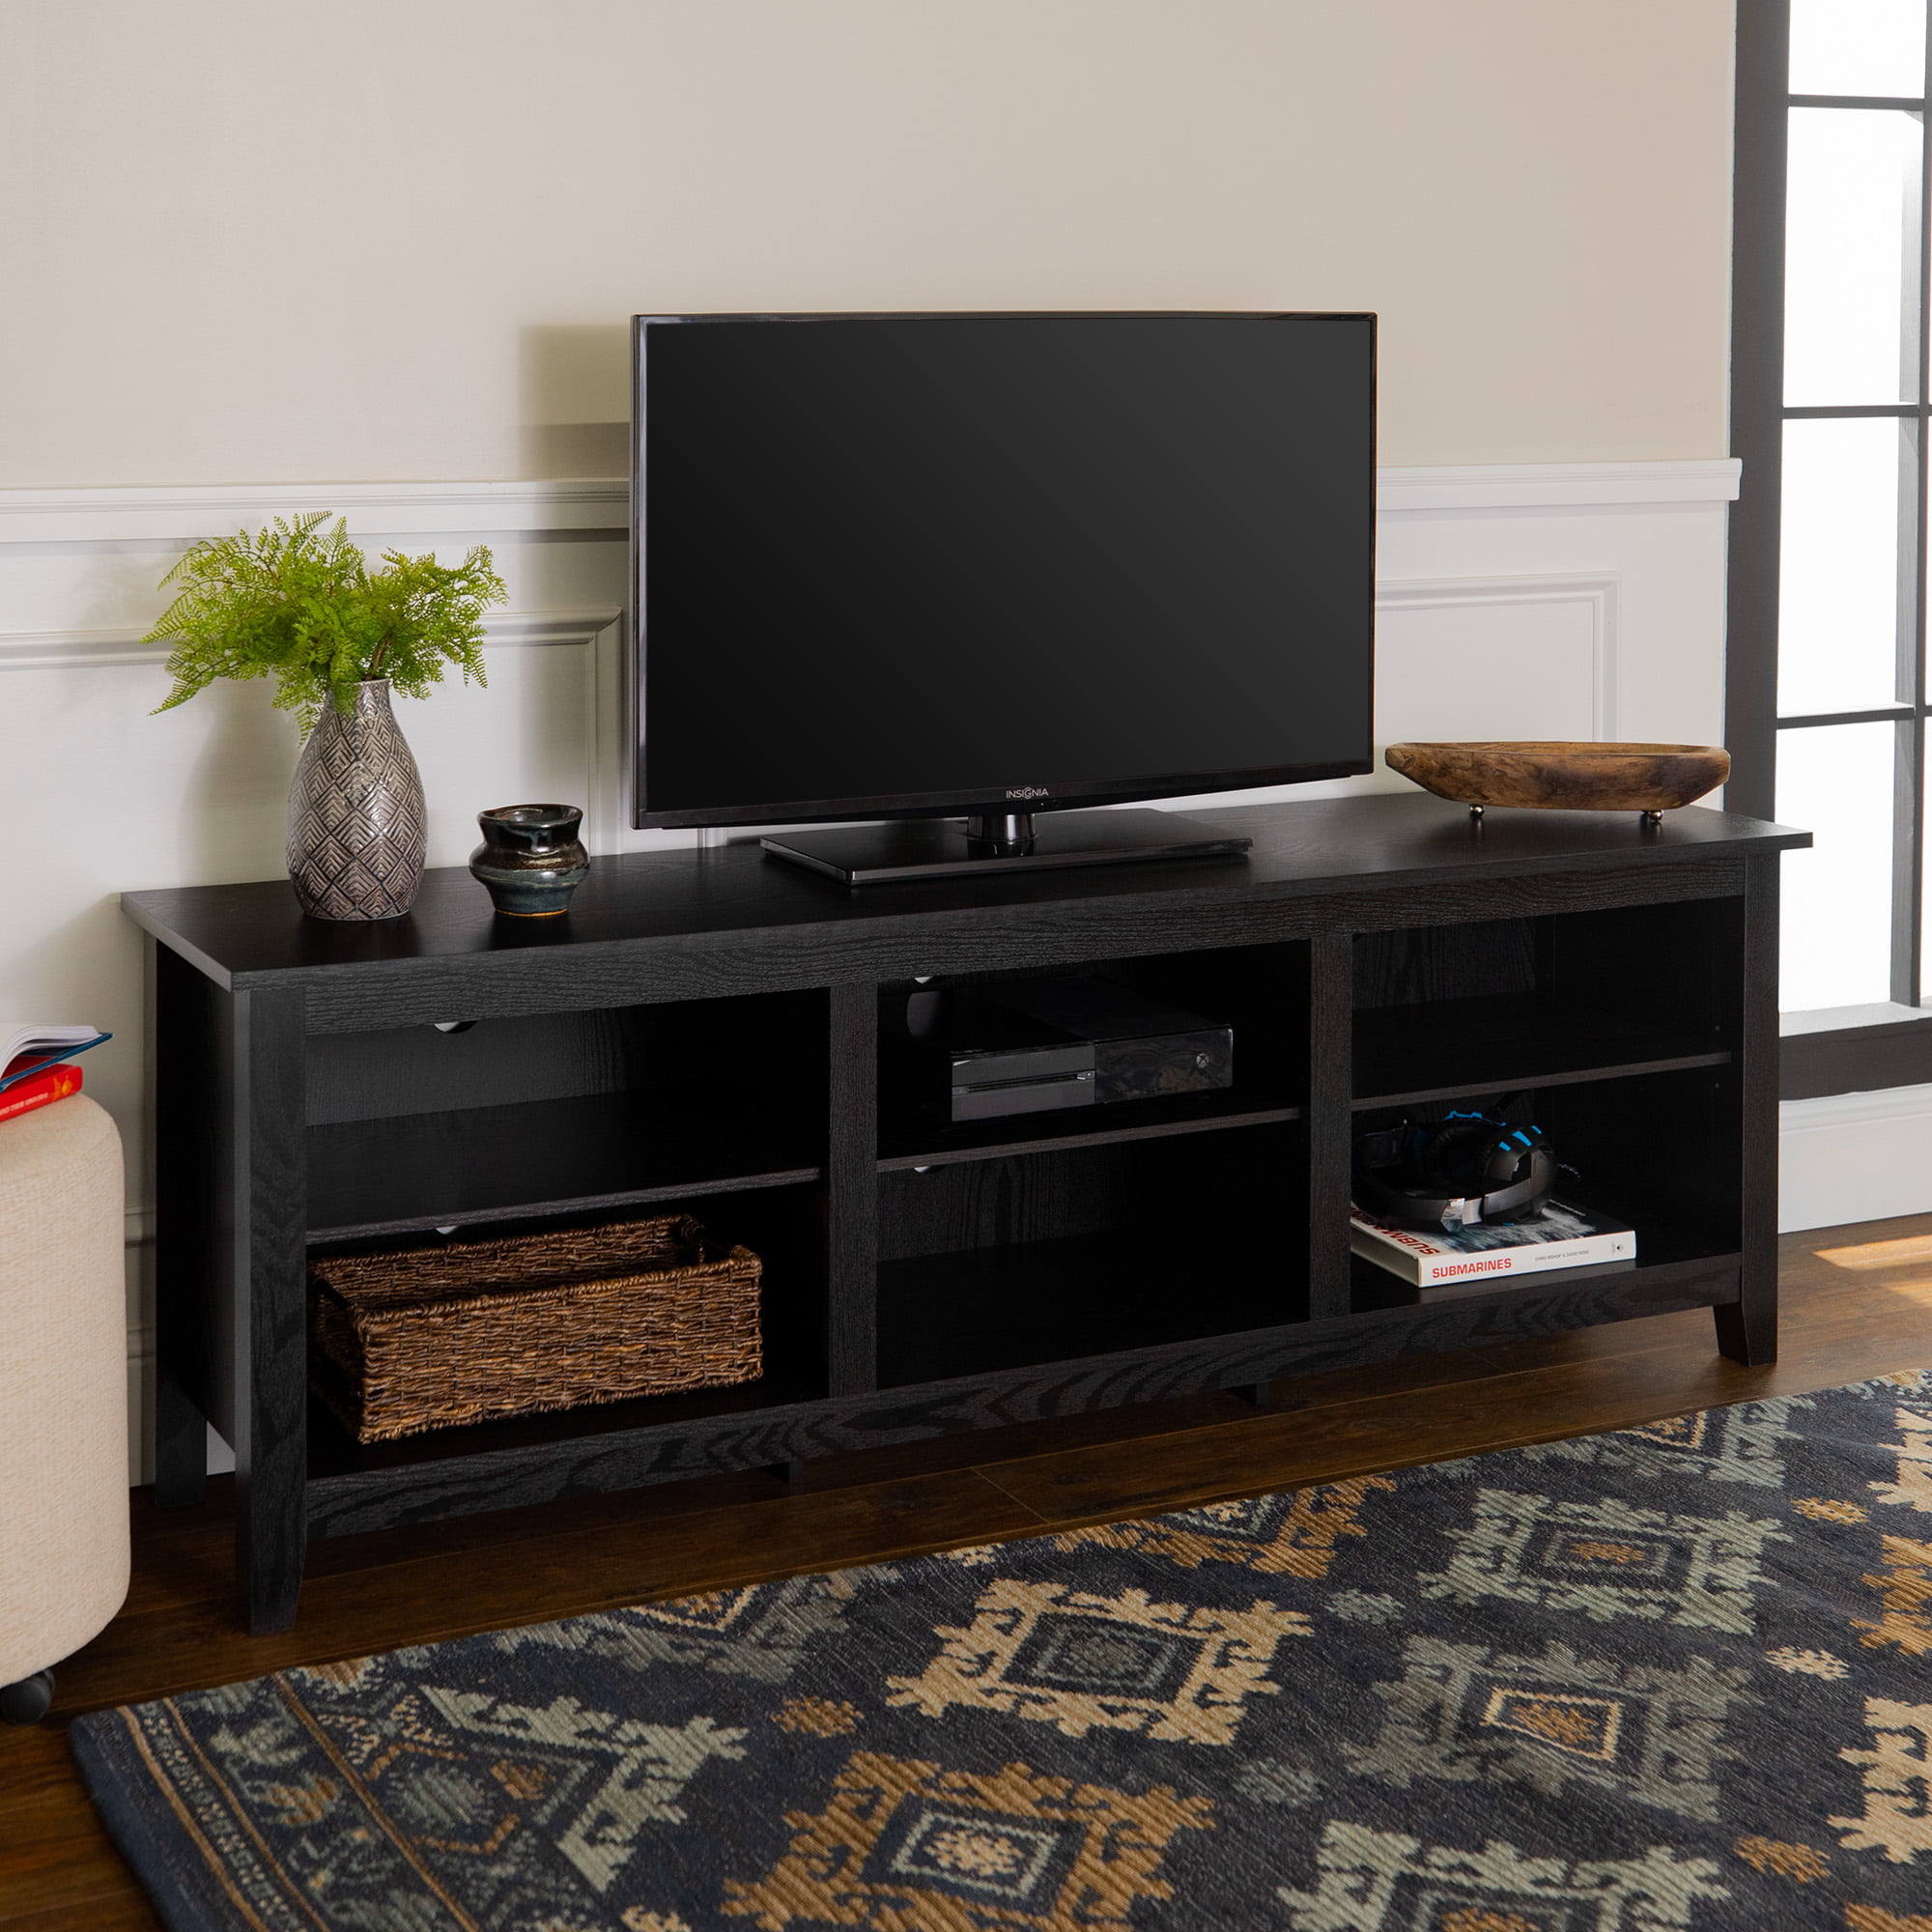 Manor Park Wood TV Media Storage Stand for TVs up to 78